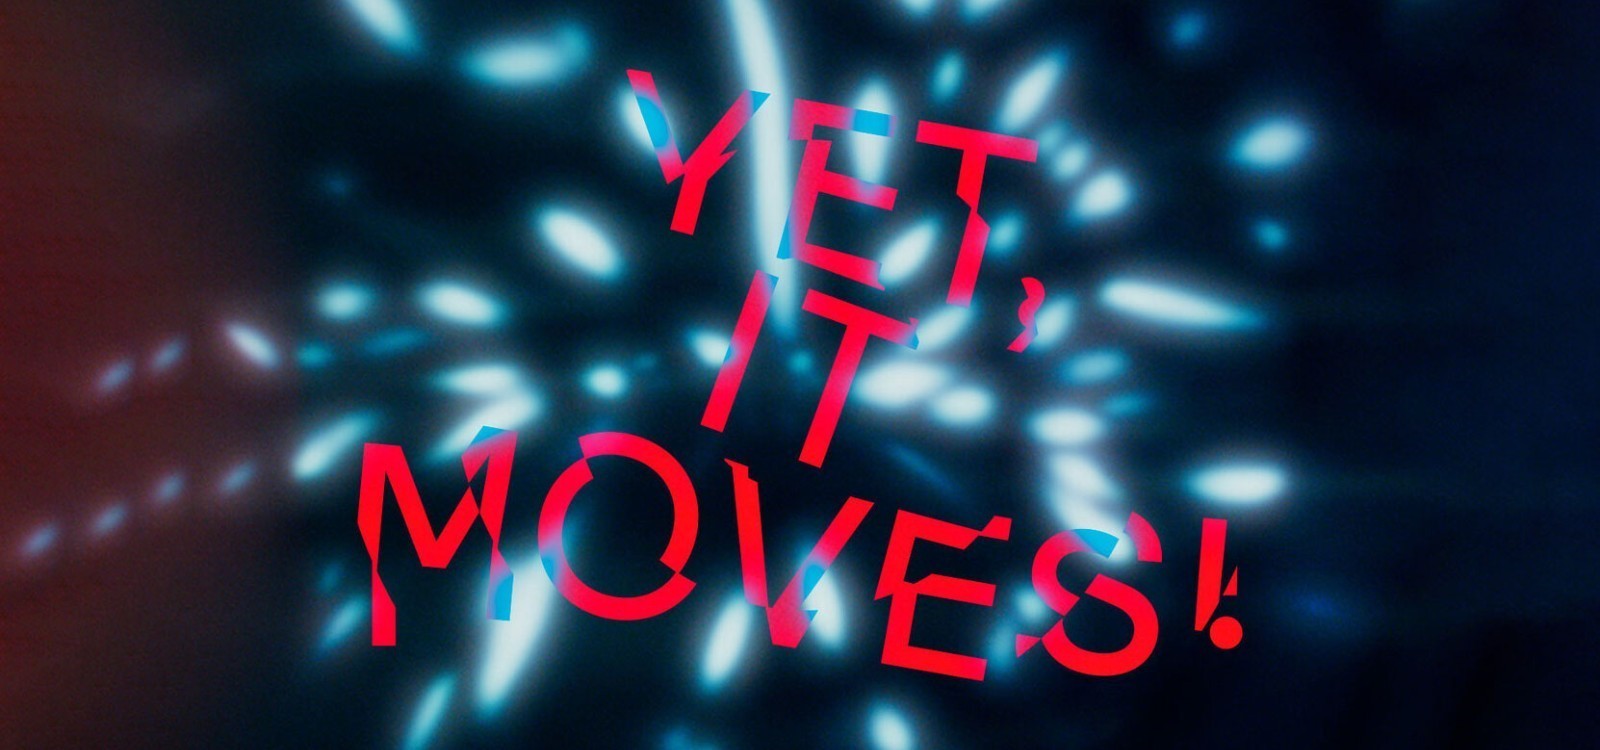 Yet it moves! Open call artwork